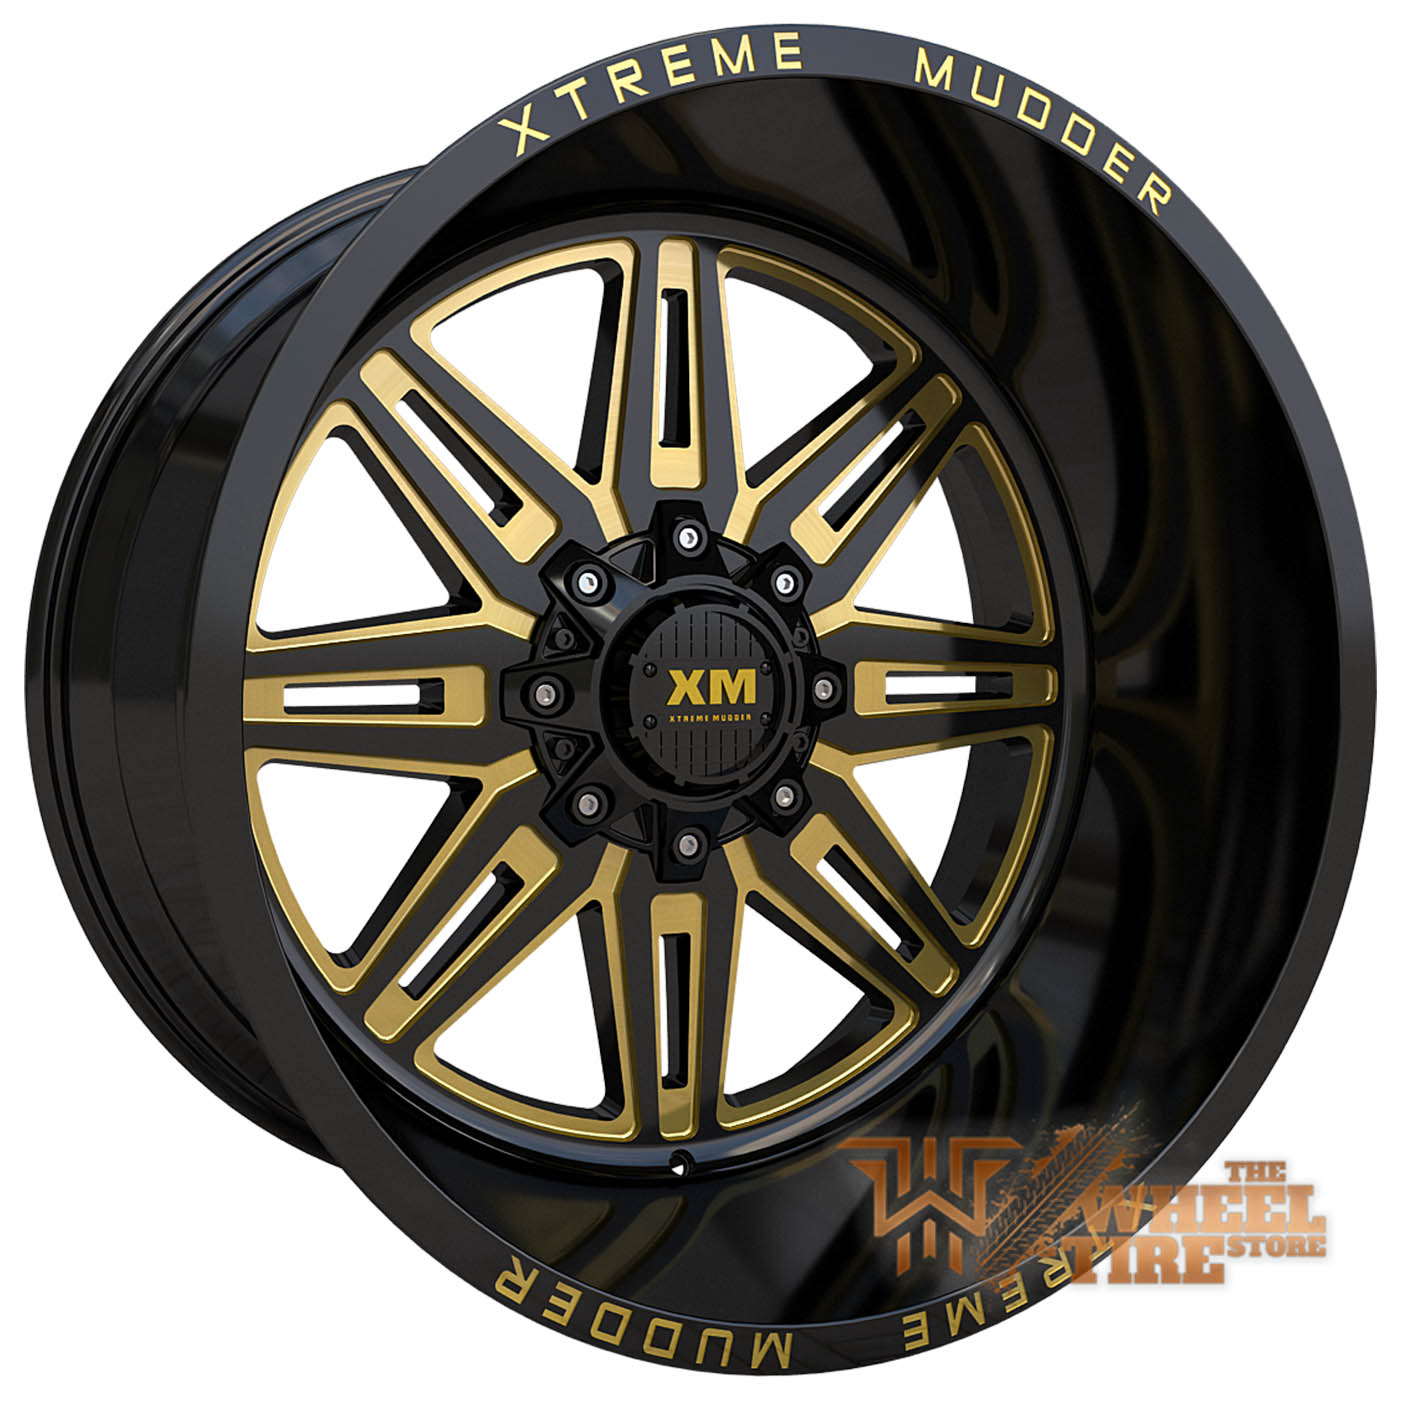 XTREME MUDDER XM-341 Wheel in Gloss Black Yellow Milled (Set of 4)